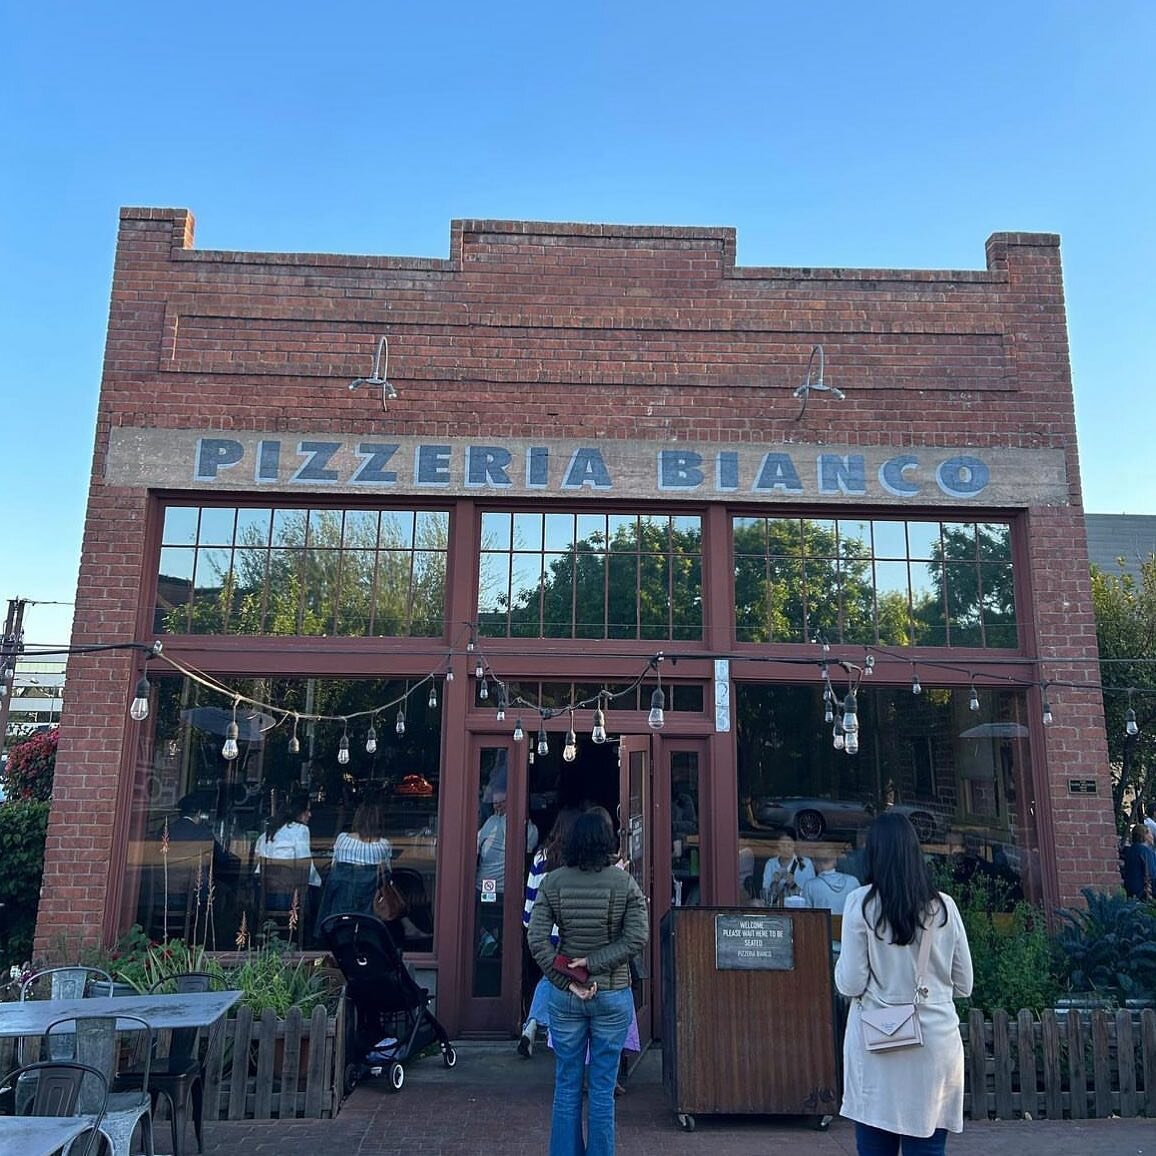 When in Phoenix, all roads lead to @pizzeriabianco. This week working with @azfireplaces was no exception!